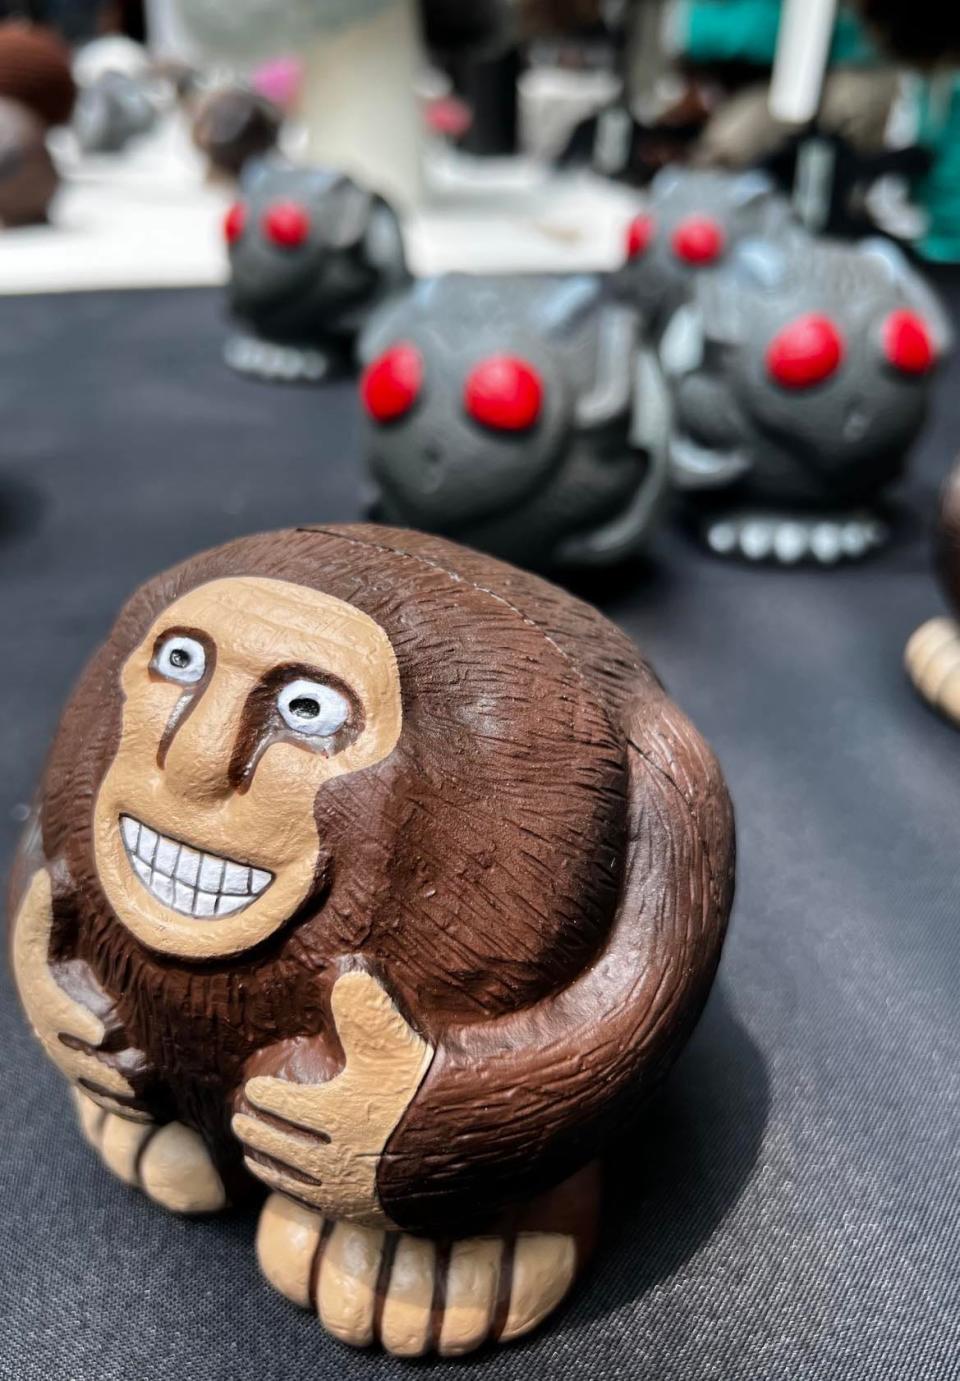 Monster Fest 2 will be June 29 at the DoubleTree by Hilton hotel in downtown Canton. The event will feature authors, investigators and vendors devoted to the study and pursuit of Bigfoot, mythical creatures, UFOs and other phenomena.